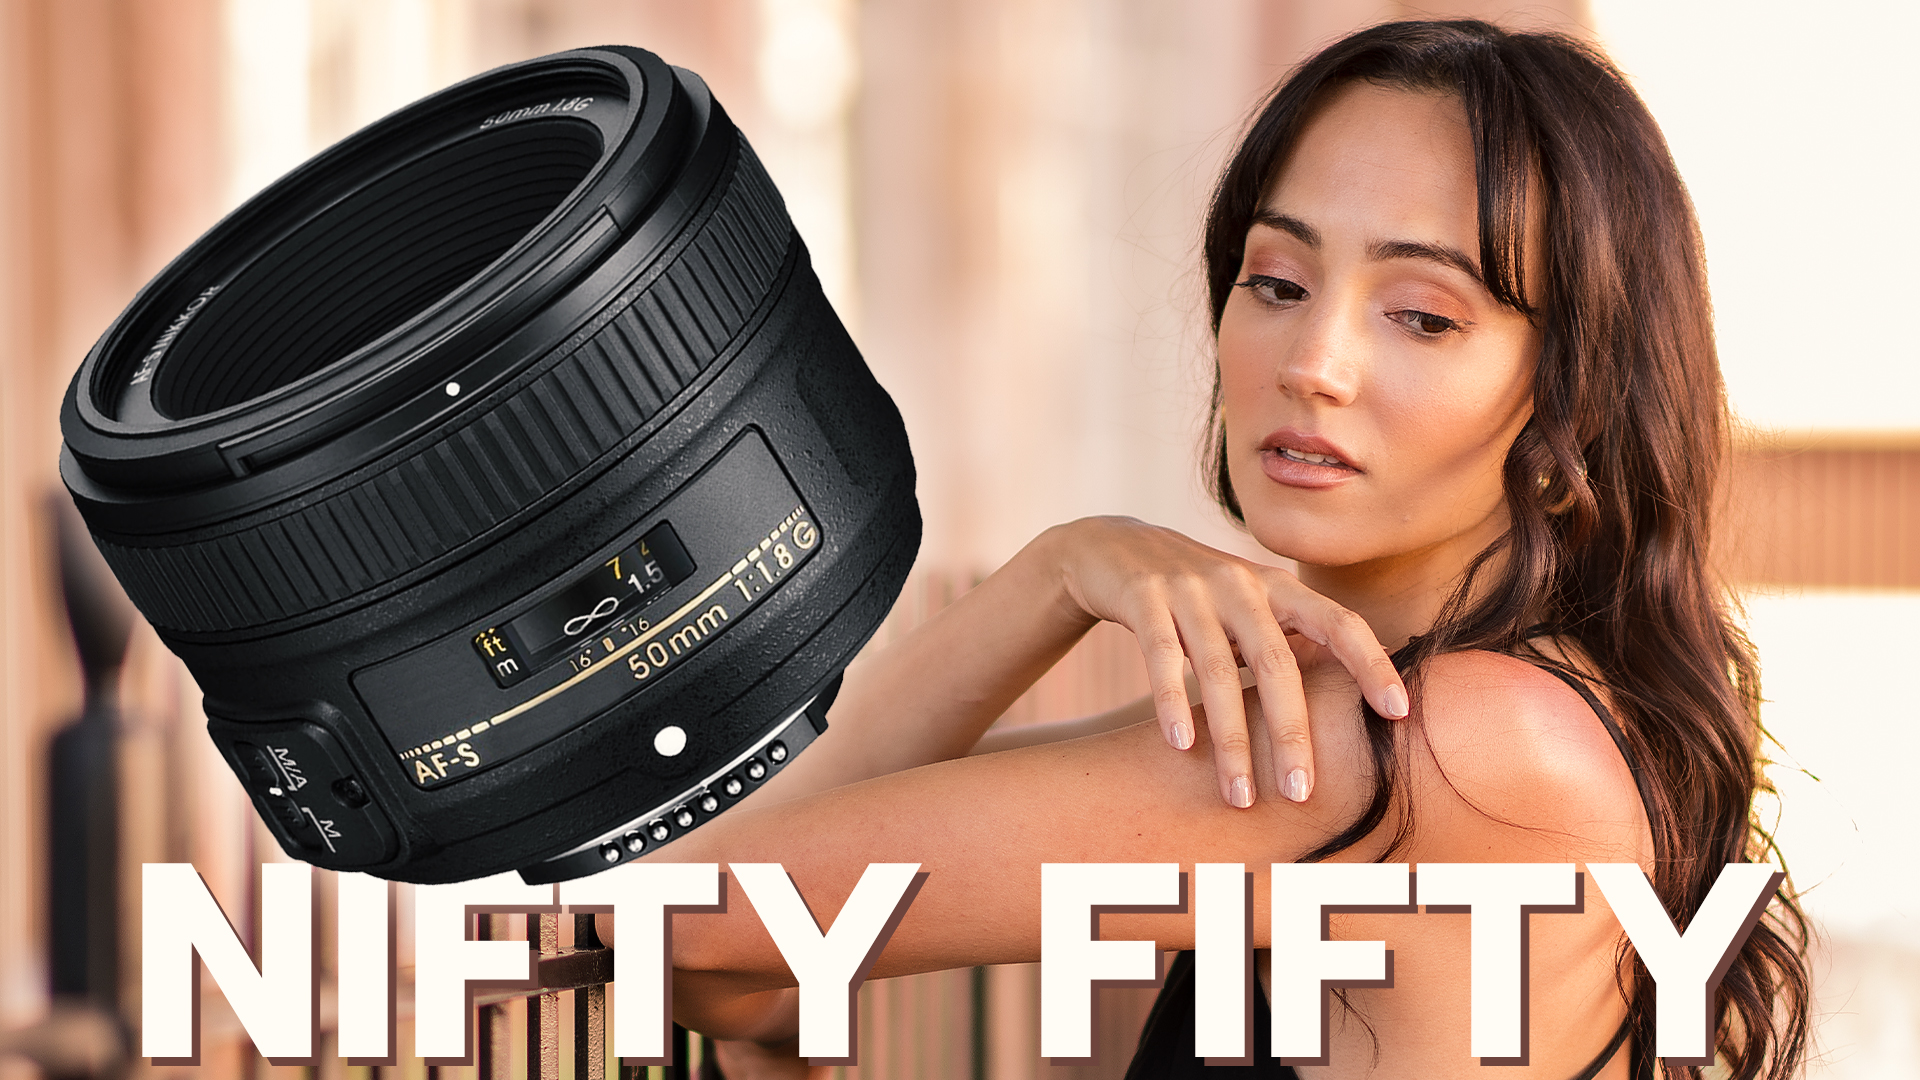 Read more about the article 6 Reasons Why You Need a Nifty Fifty